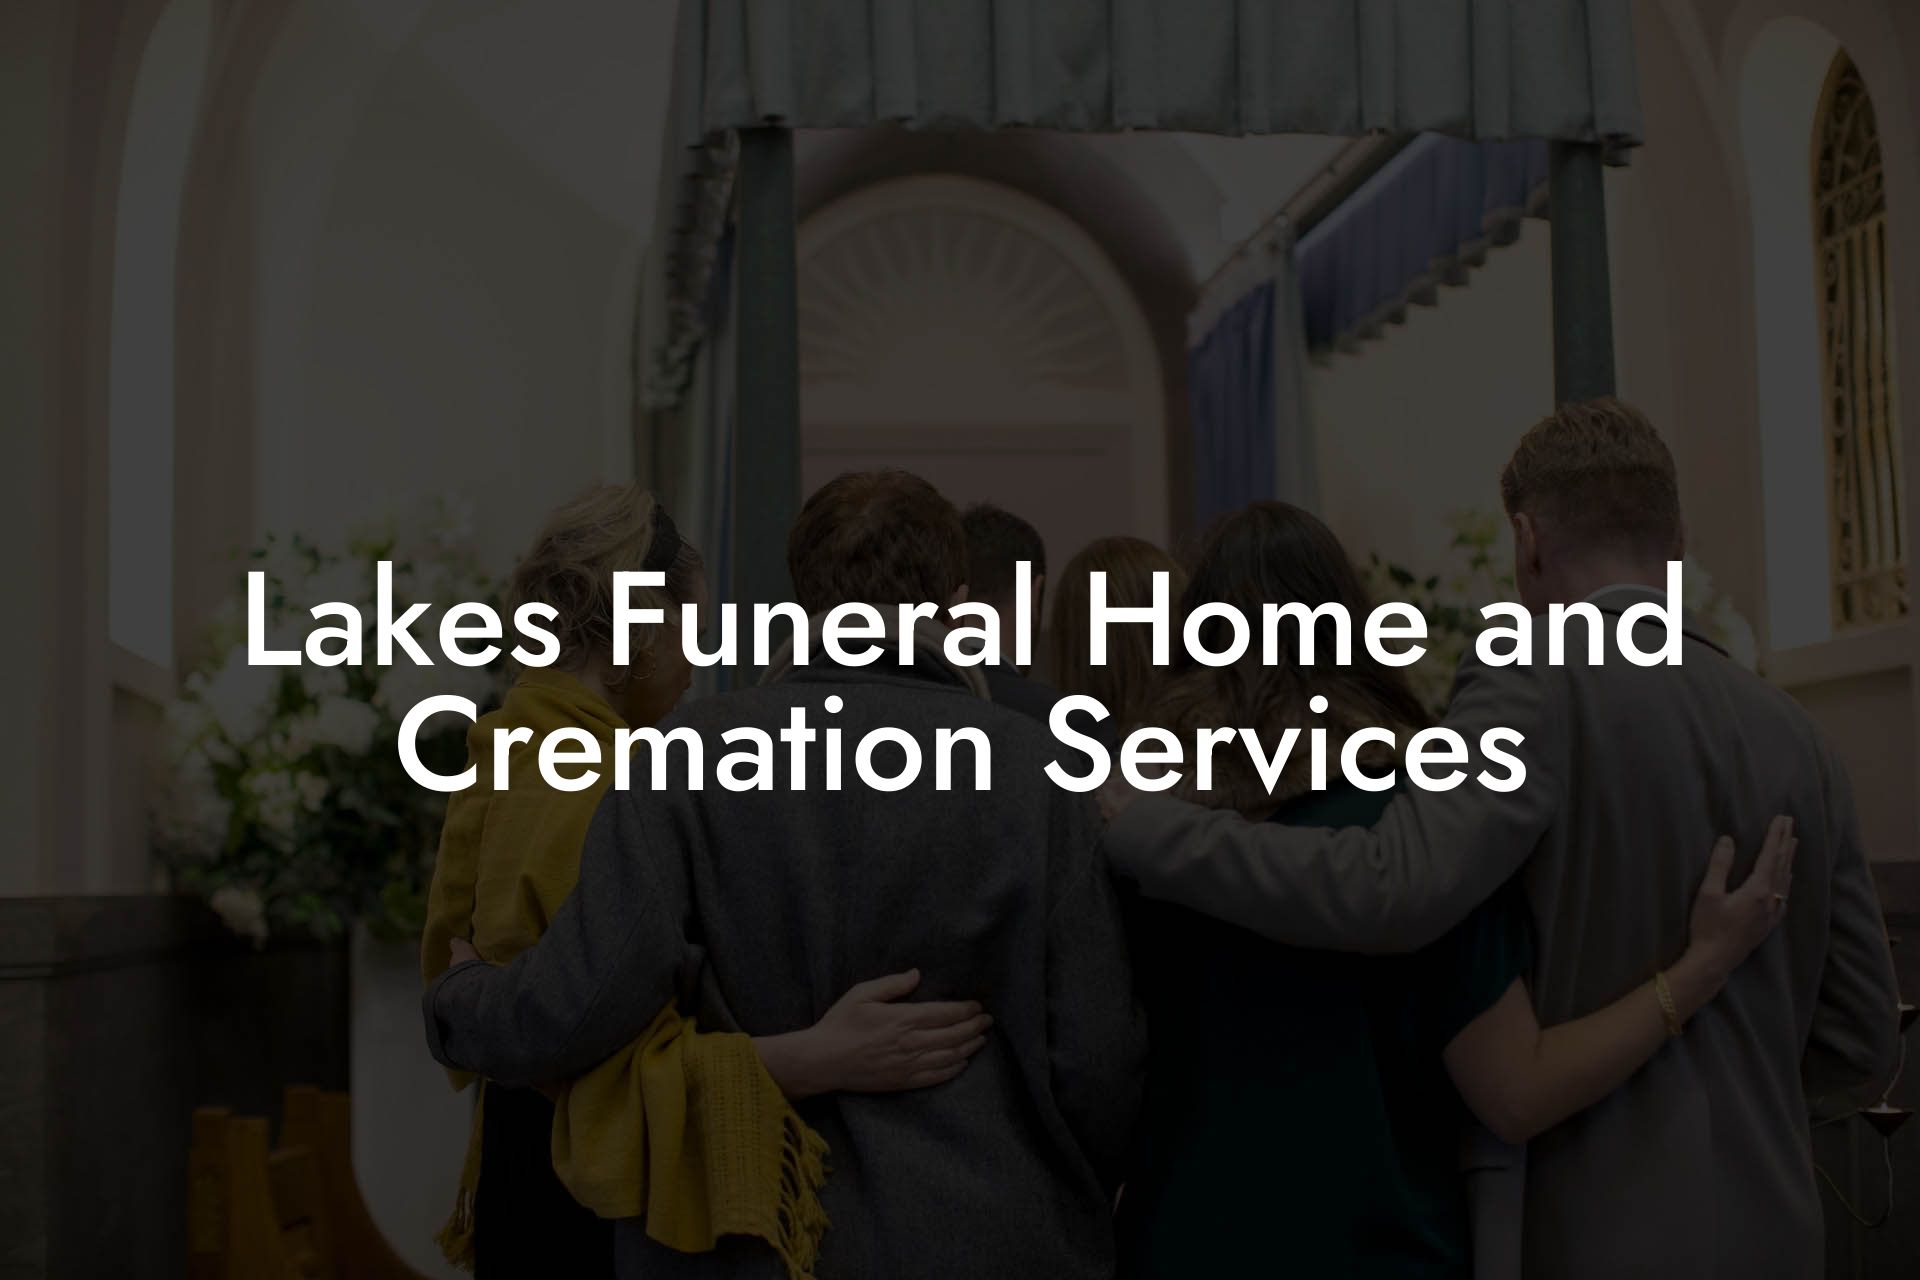 Lakes Funeral Home and Cremation Services Eulogy Assistant